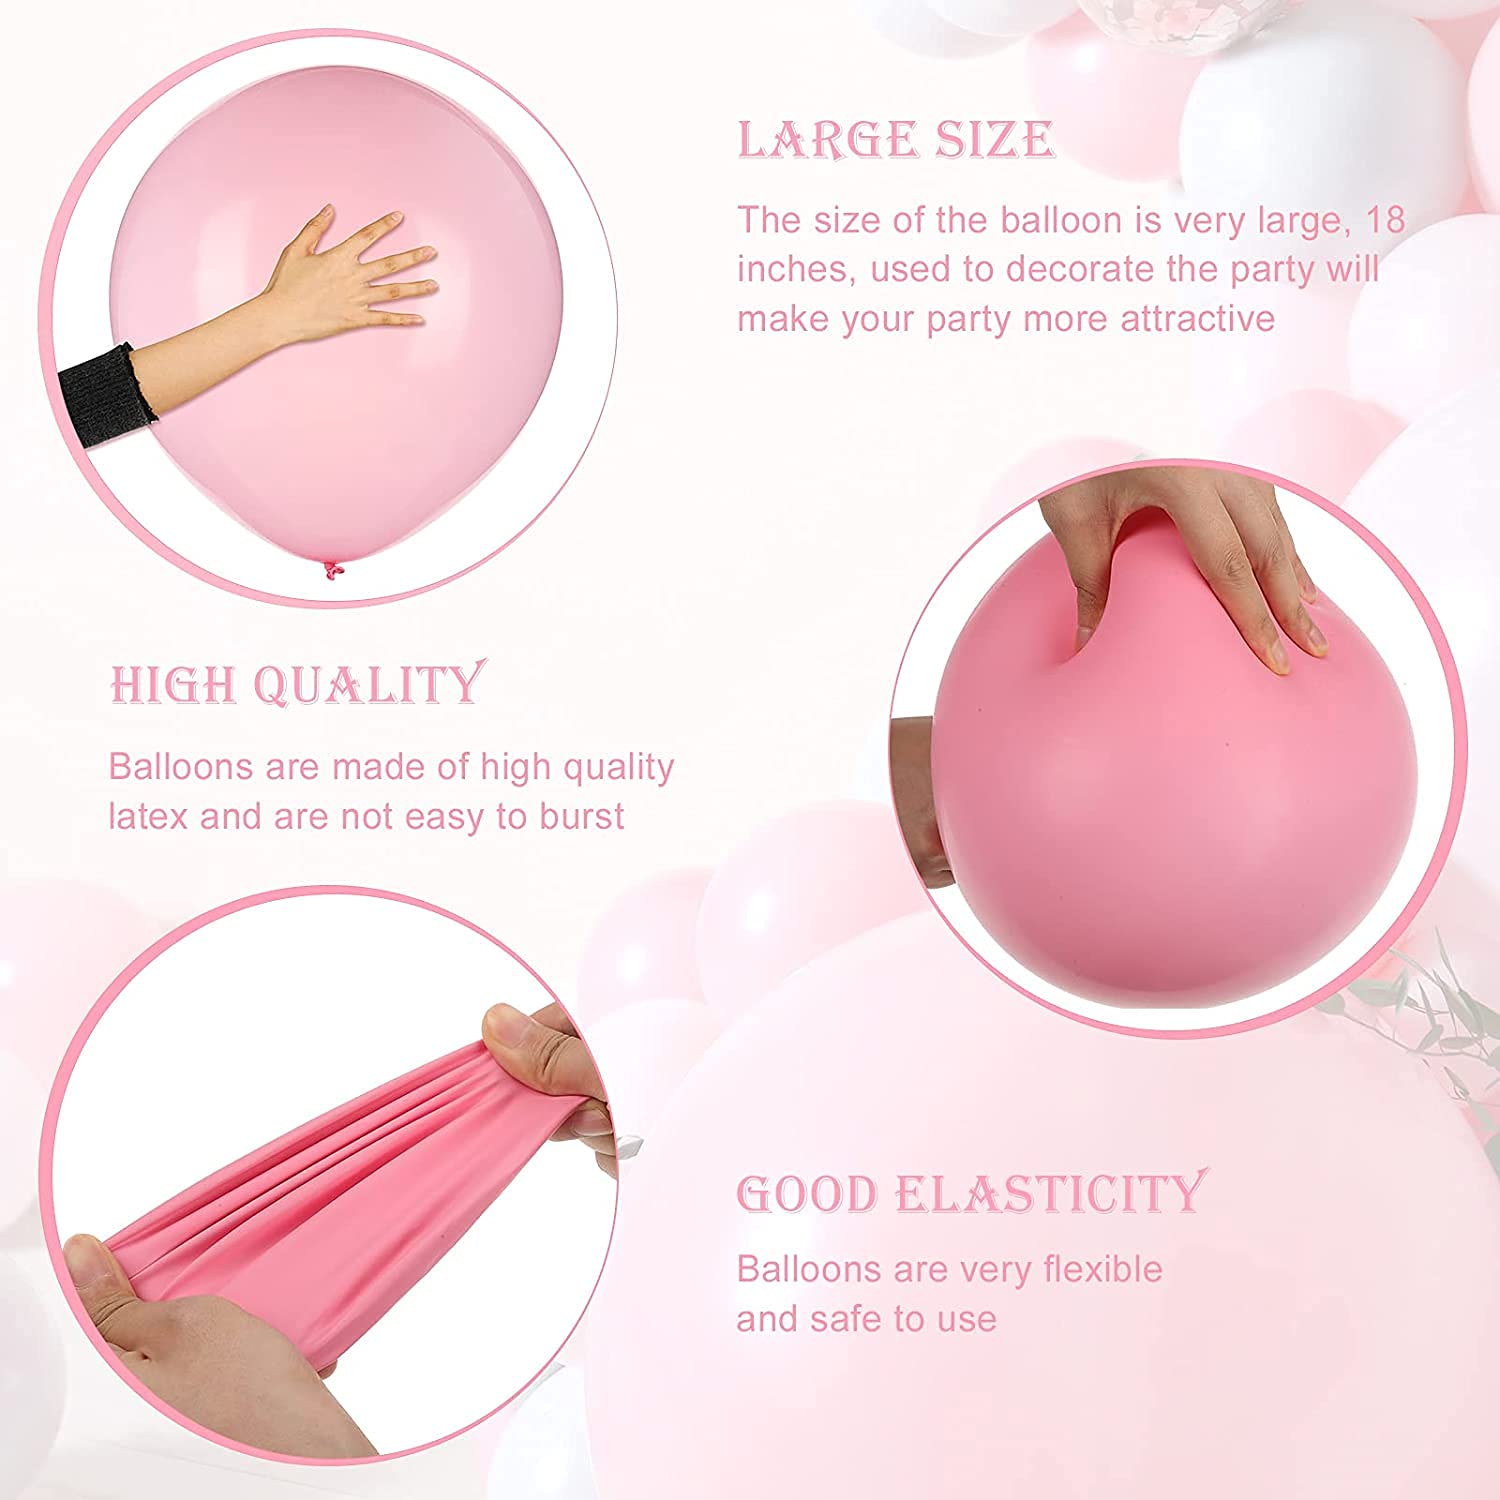 KAKOLOPT Pastel Balloons 18 Inch / 45cm 12 Pcs Large Pastel Balloons Macaron Latex Balloons Assorted Colorful Jumbo Christmas Party Balloons for Baby Shower Kid Birthday Wedding Party Decorations